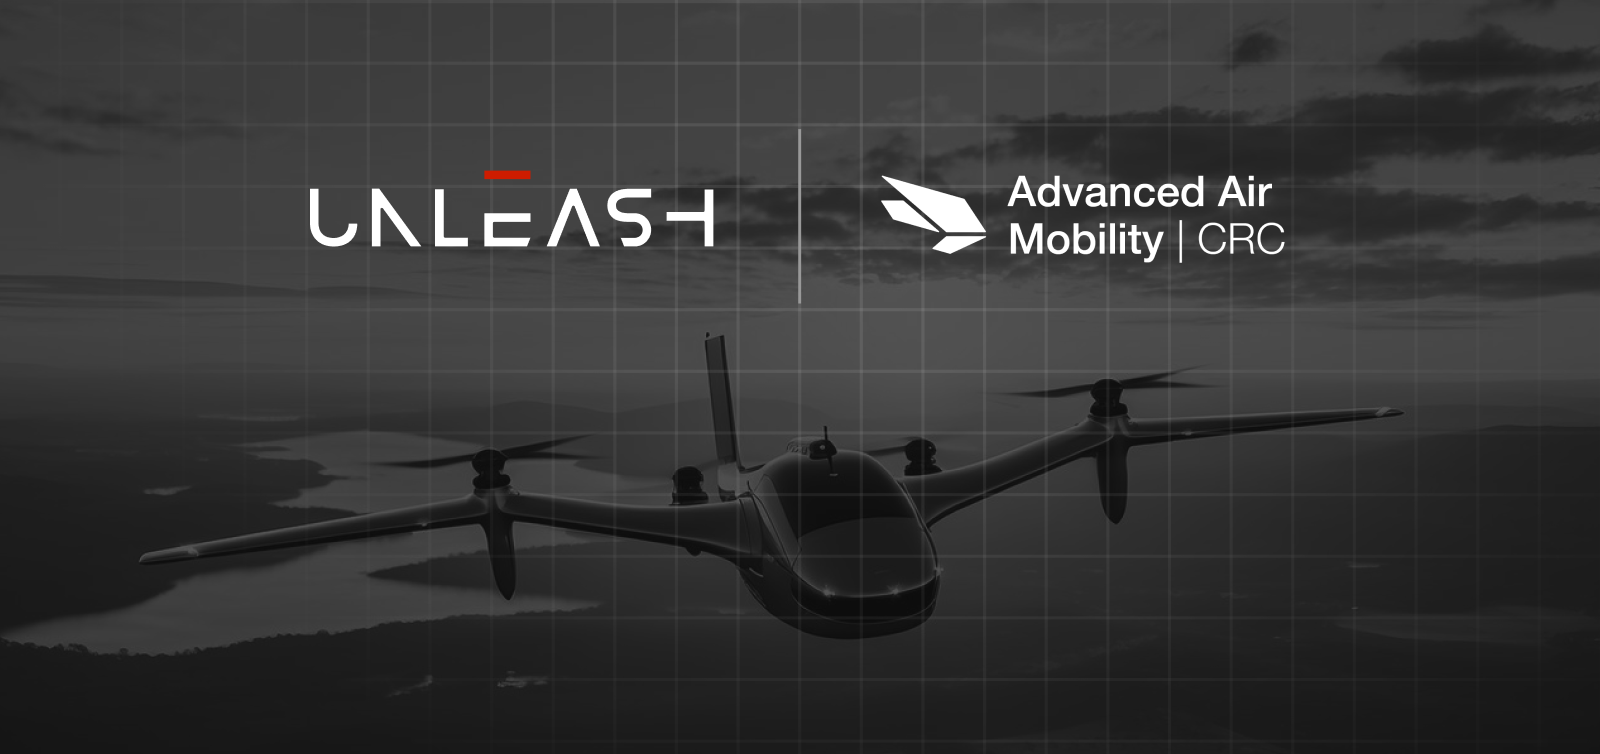 Read full post: Unleash live Participates in Advanced Air Mobility’s CRC Phase 1 Submission